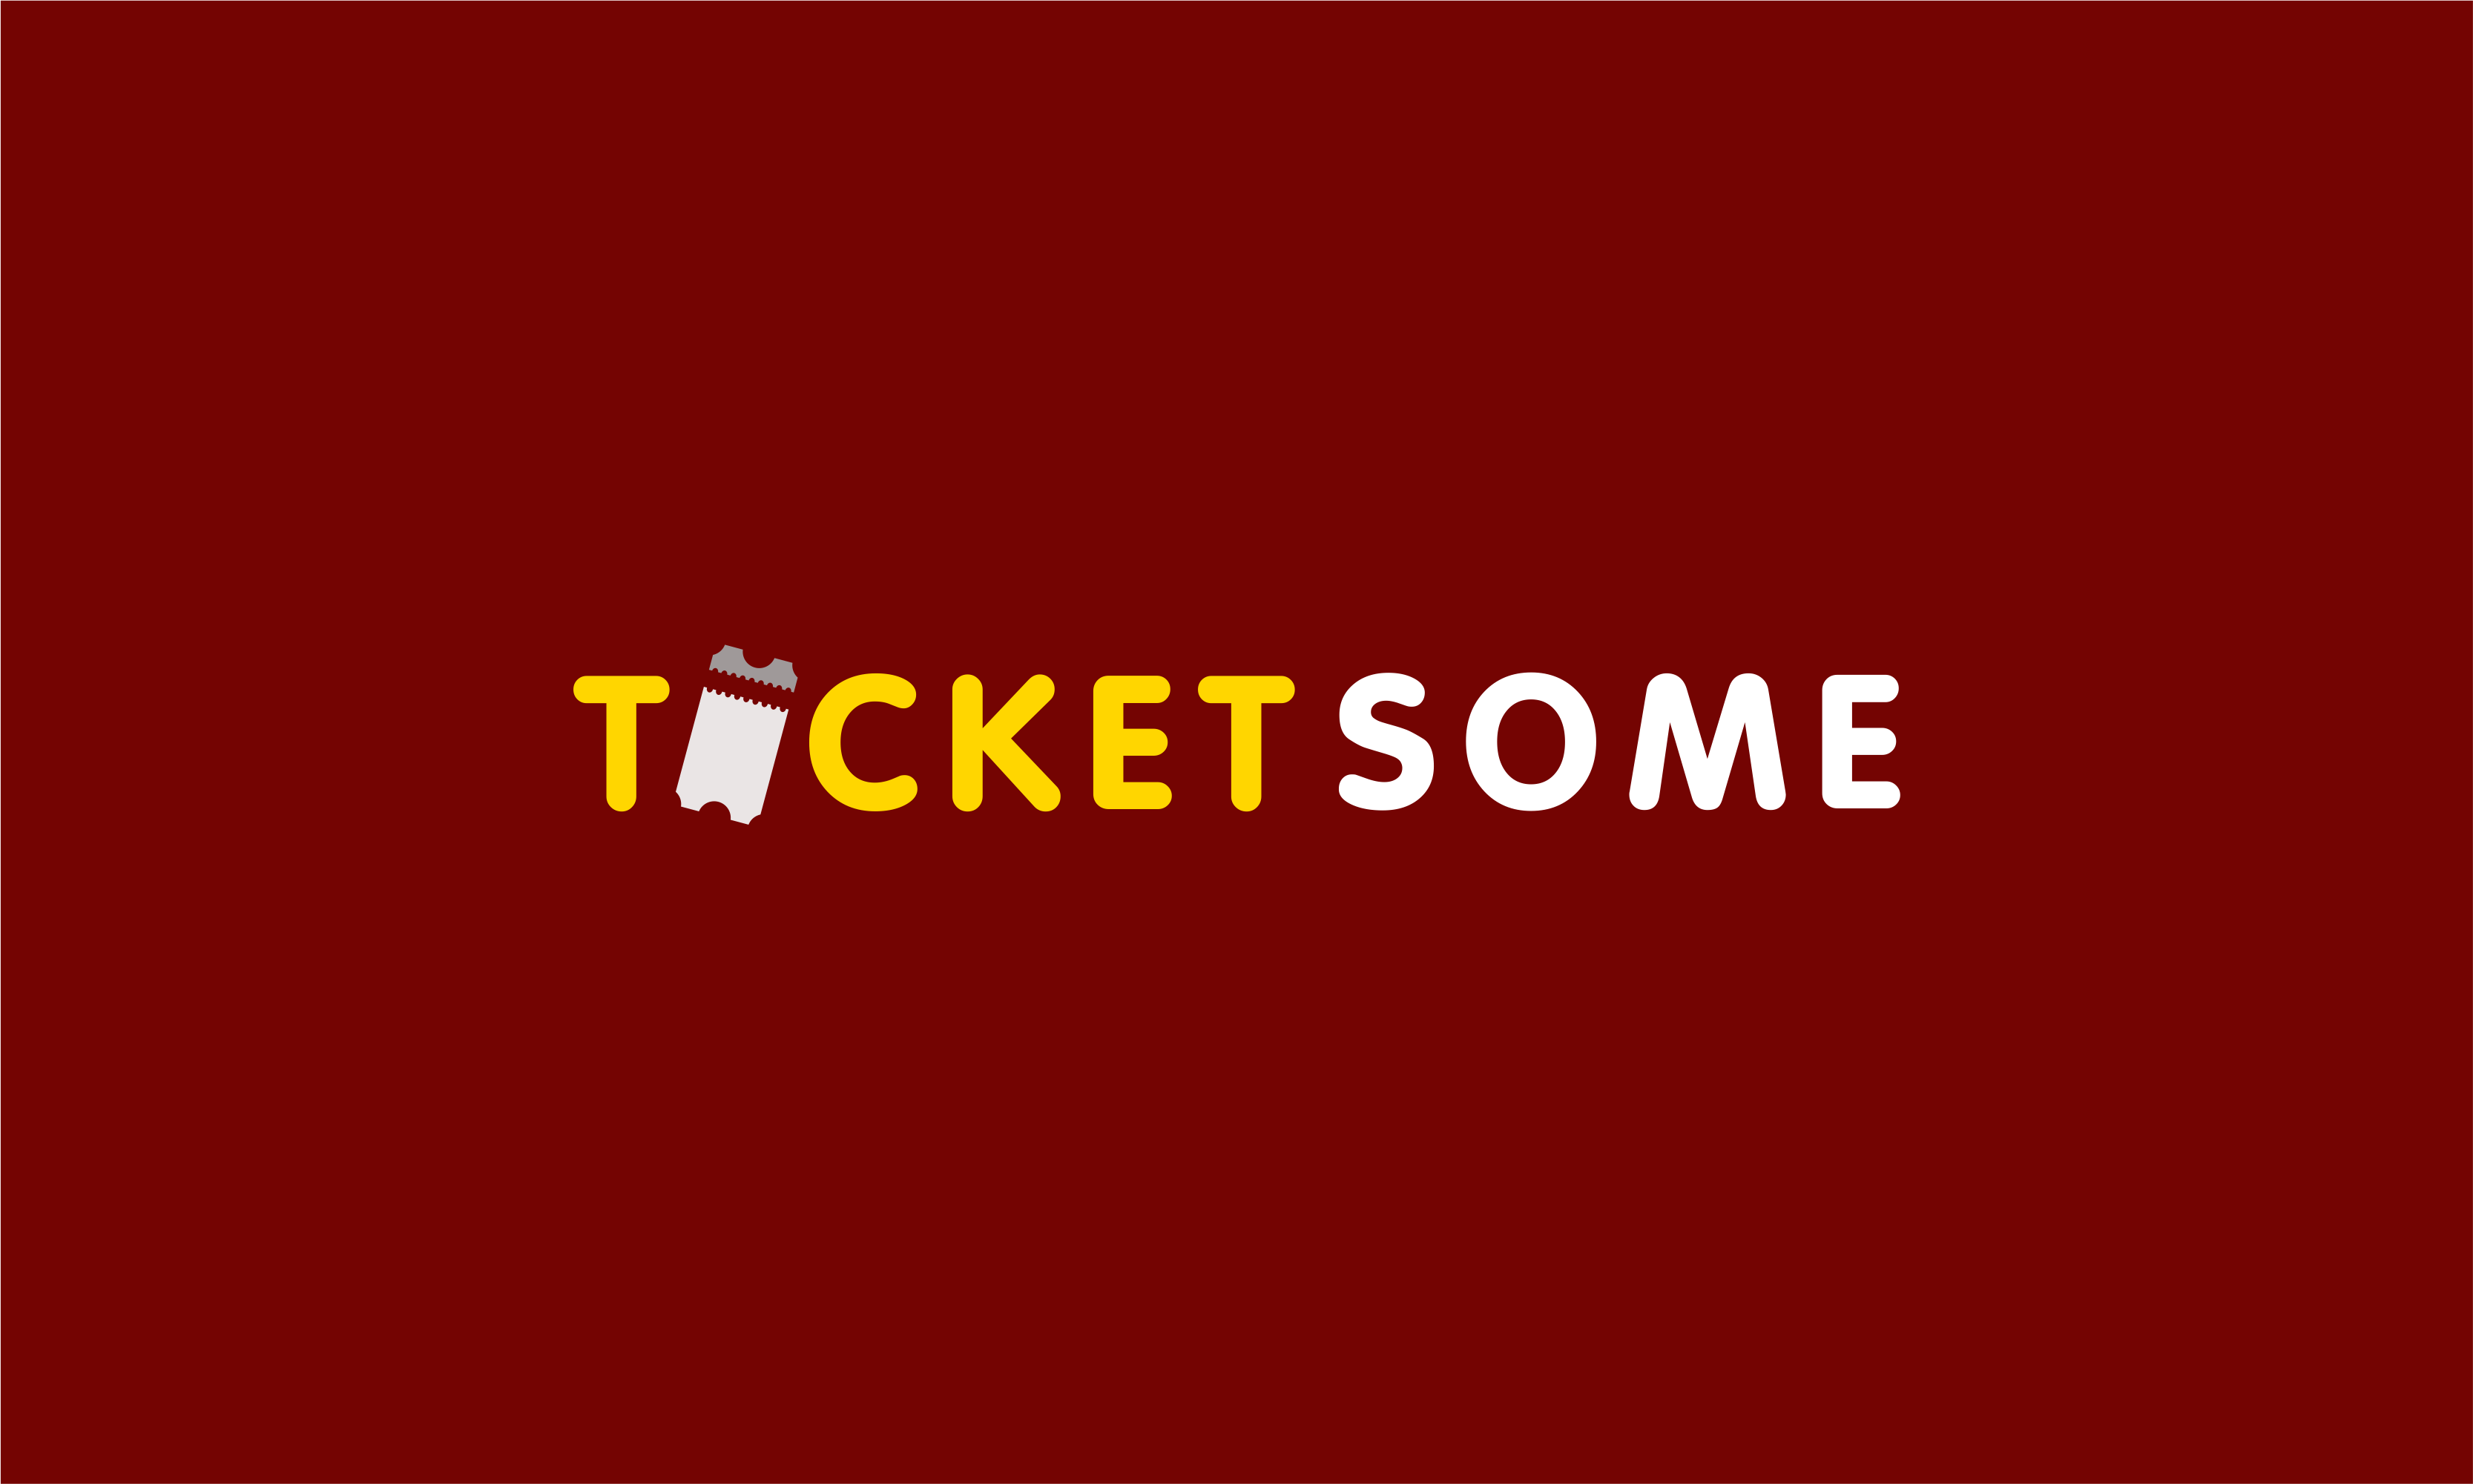 TicketsomeFinal.png